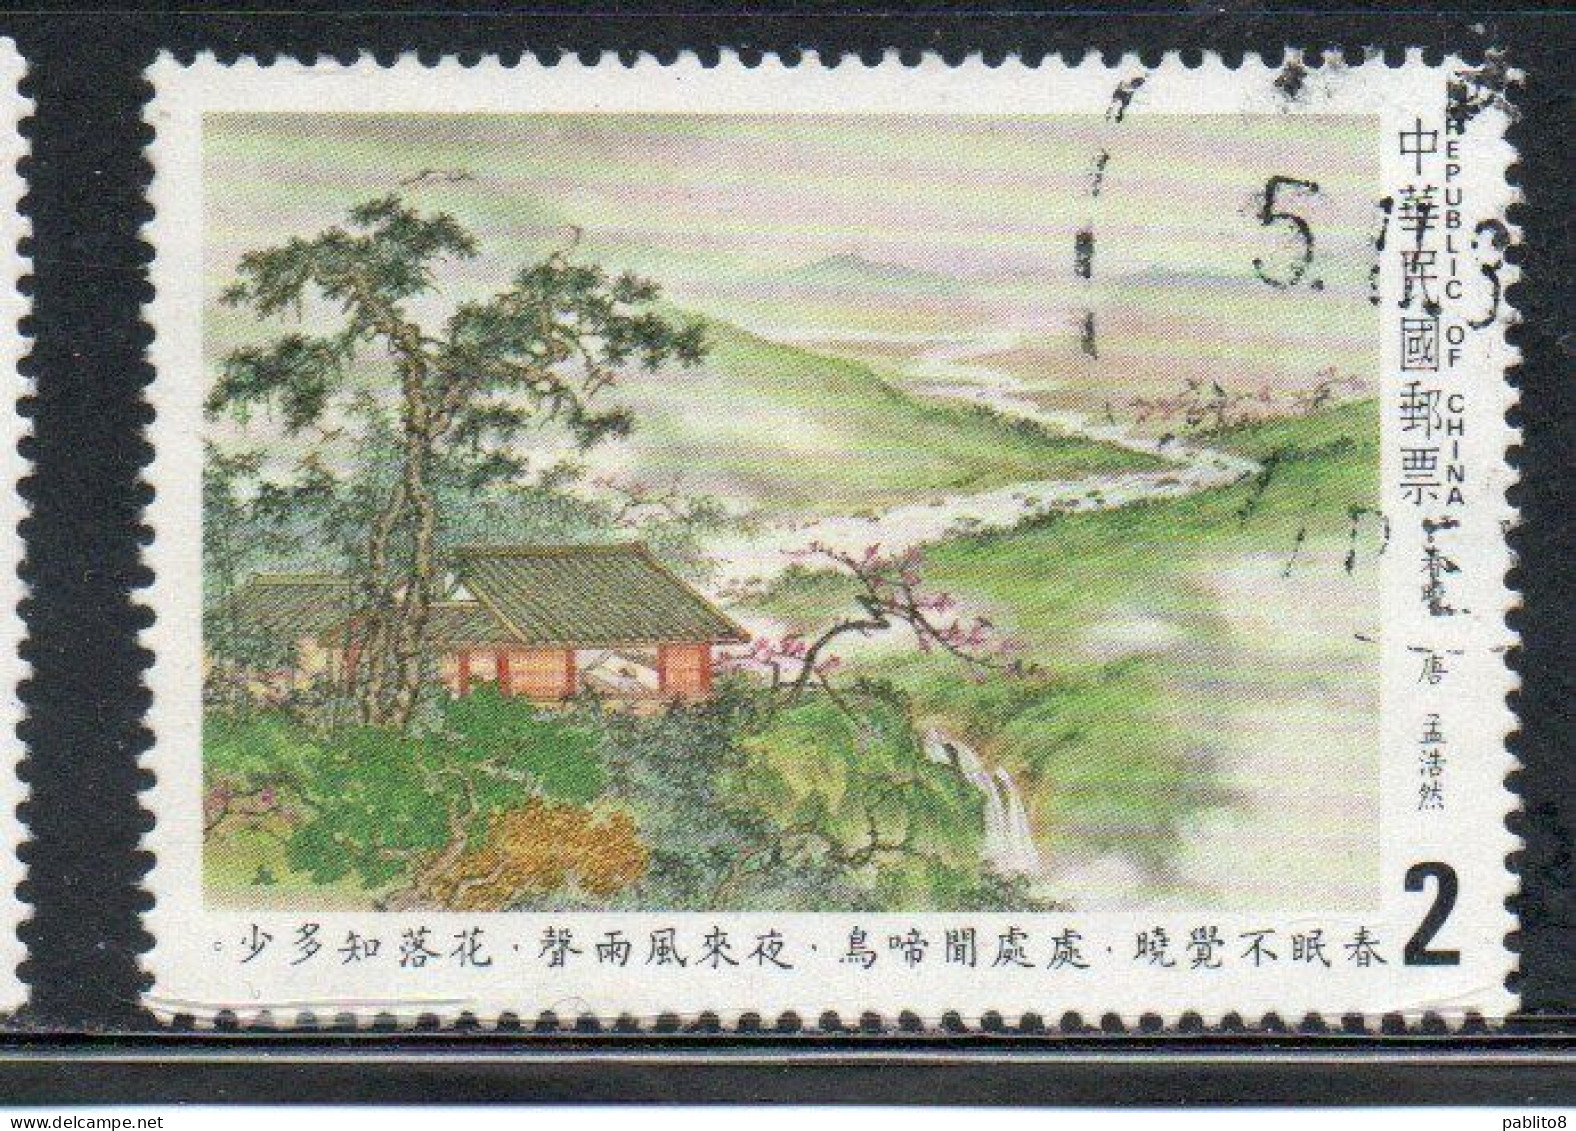 CHINA REPUBLIC CINA TAIWAN FORMOSA 1983 SUNG DINASTY POETRY ILLUSTRATION SEEING THE FOWERS FADE AWAY 2$ USED USATO - Gebraucht